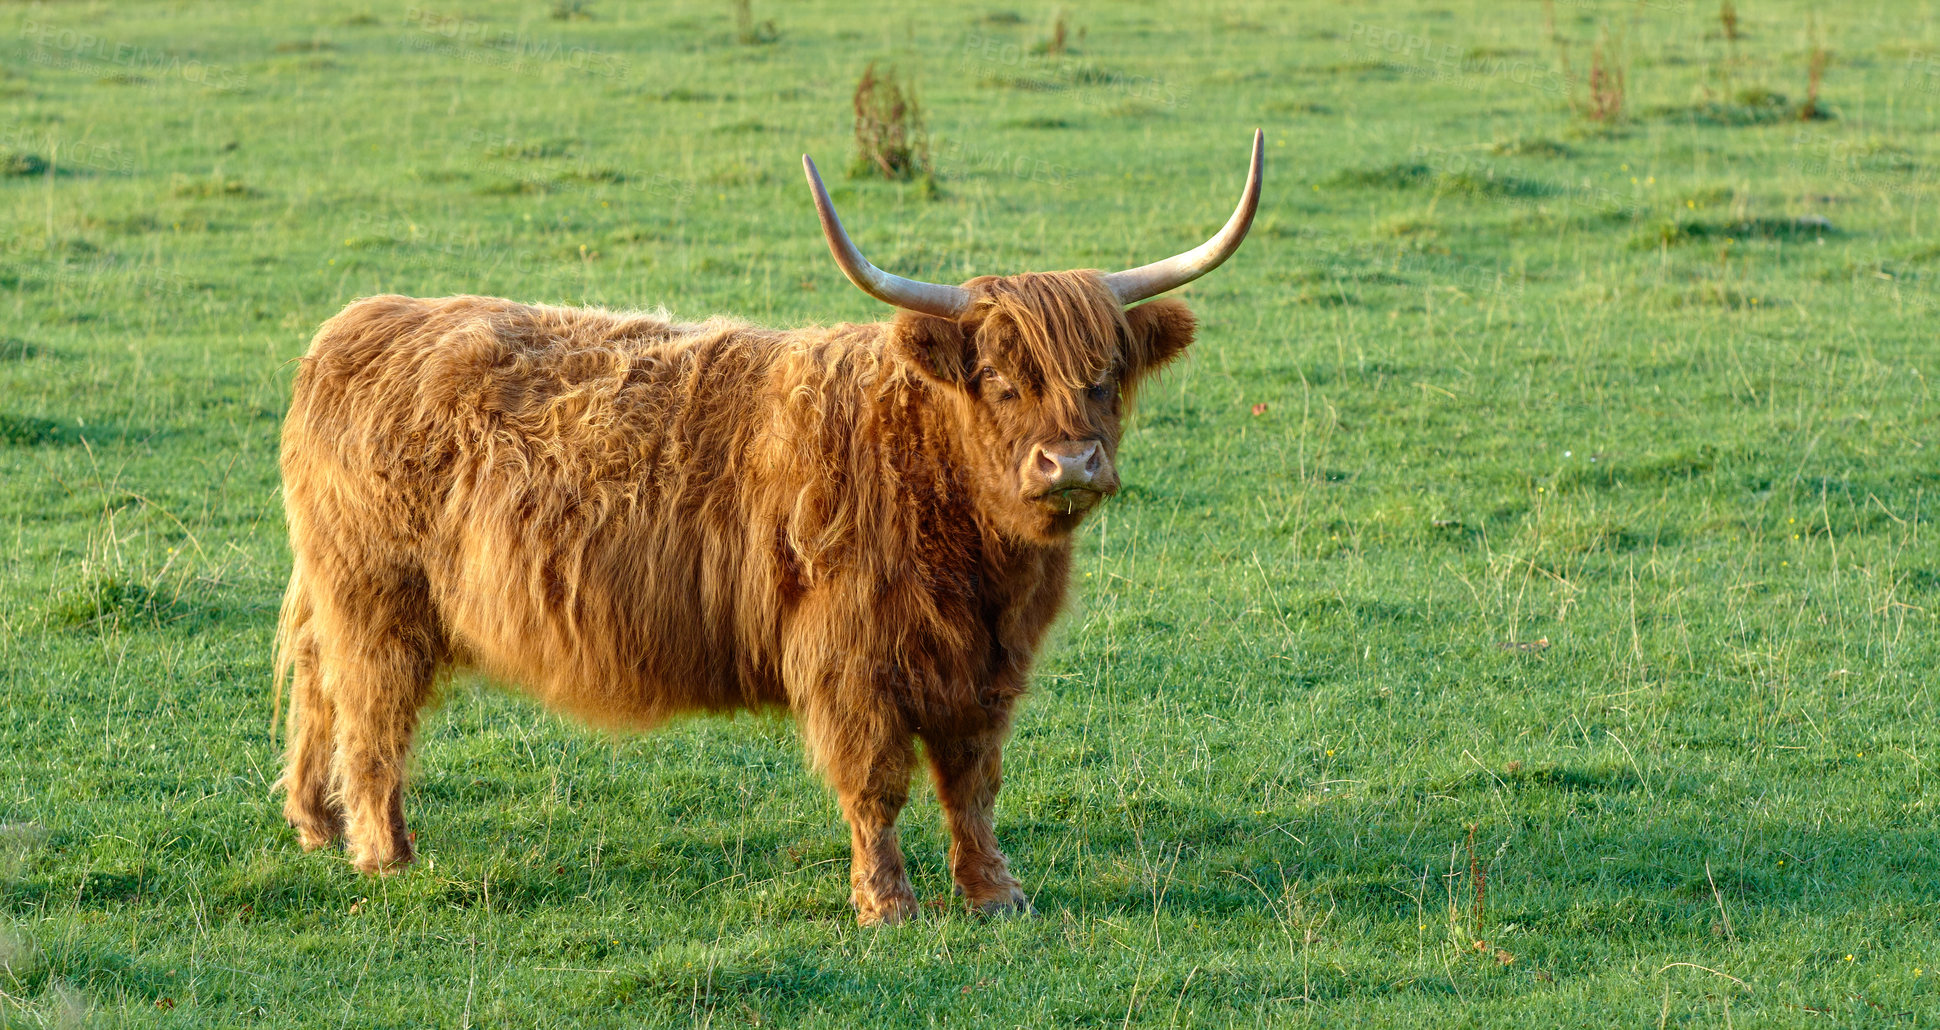 Buy stock photo Grass fed Highland cow on farm pasture, grazing and raised for dairy, meat or beef industry. Full length of hairy cattle animal standing alone on green remote farmland or agricultural estate